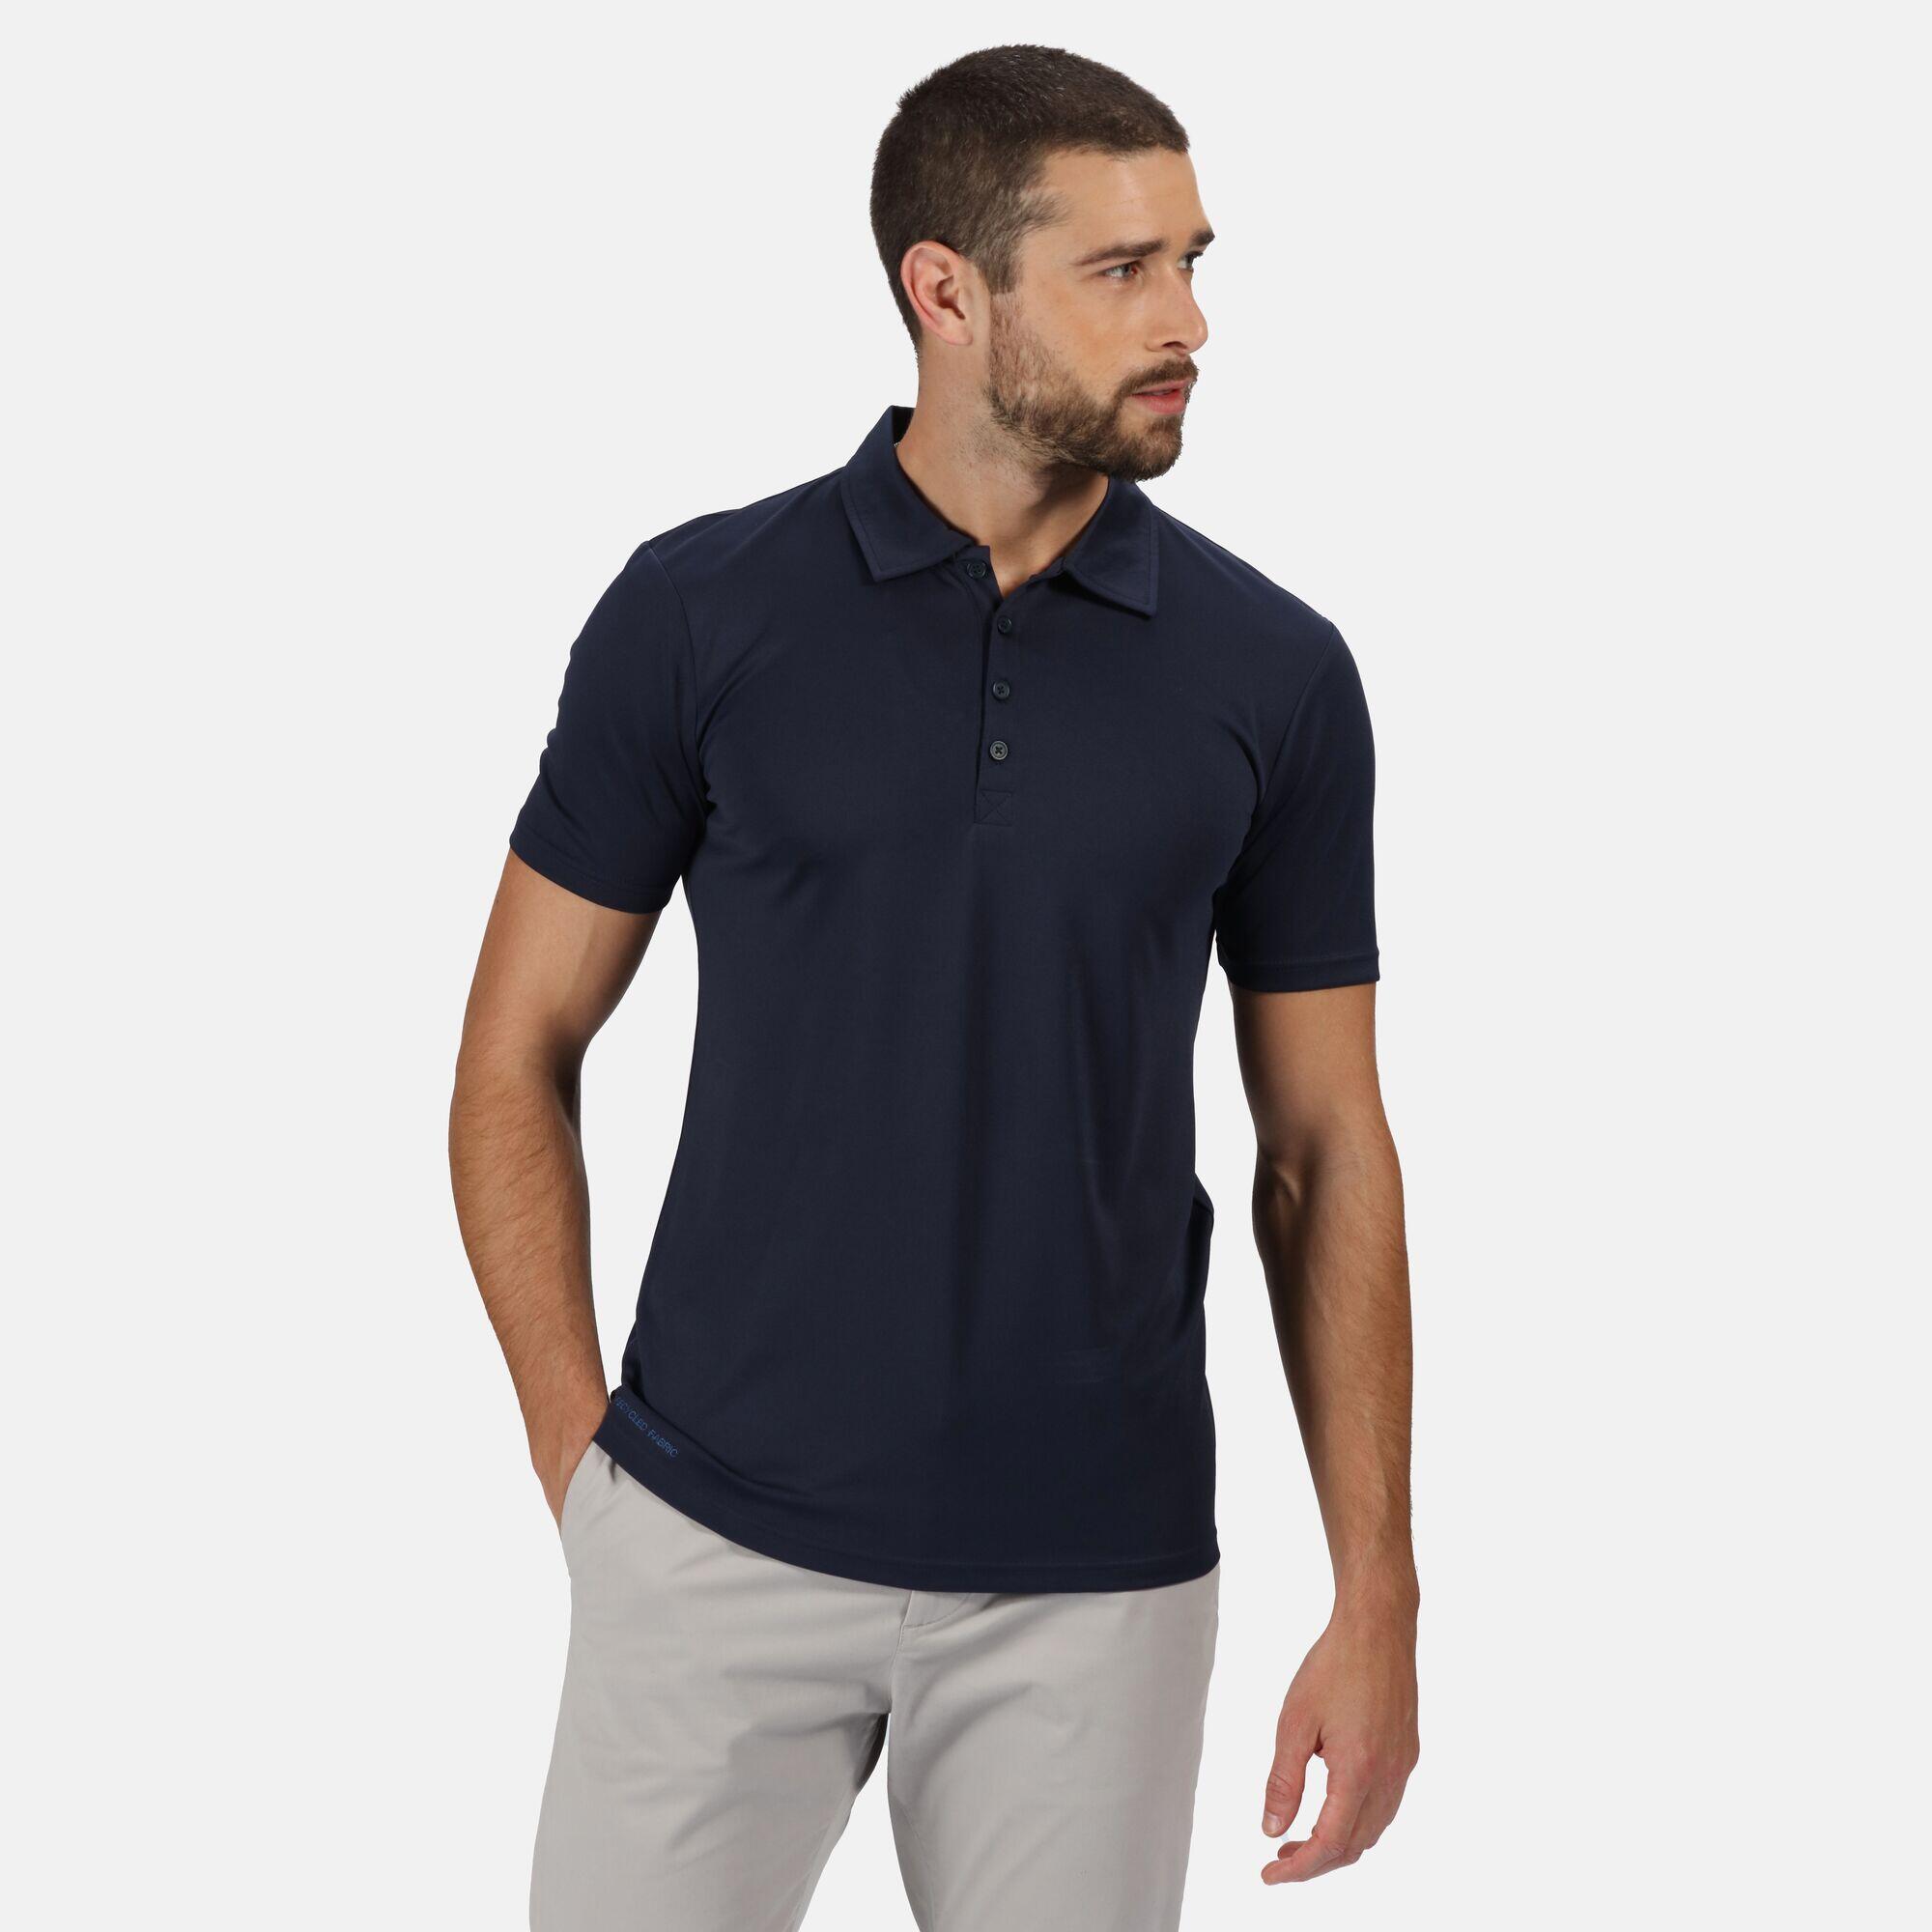 Mens Honestly Made Recycled Polo Shirt (Navy) 4/5